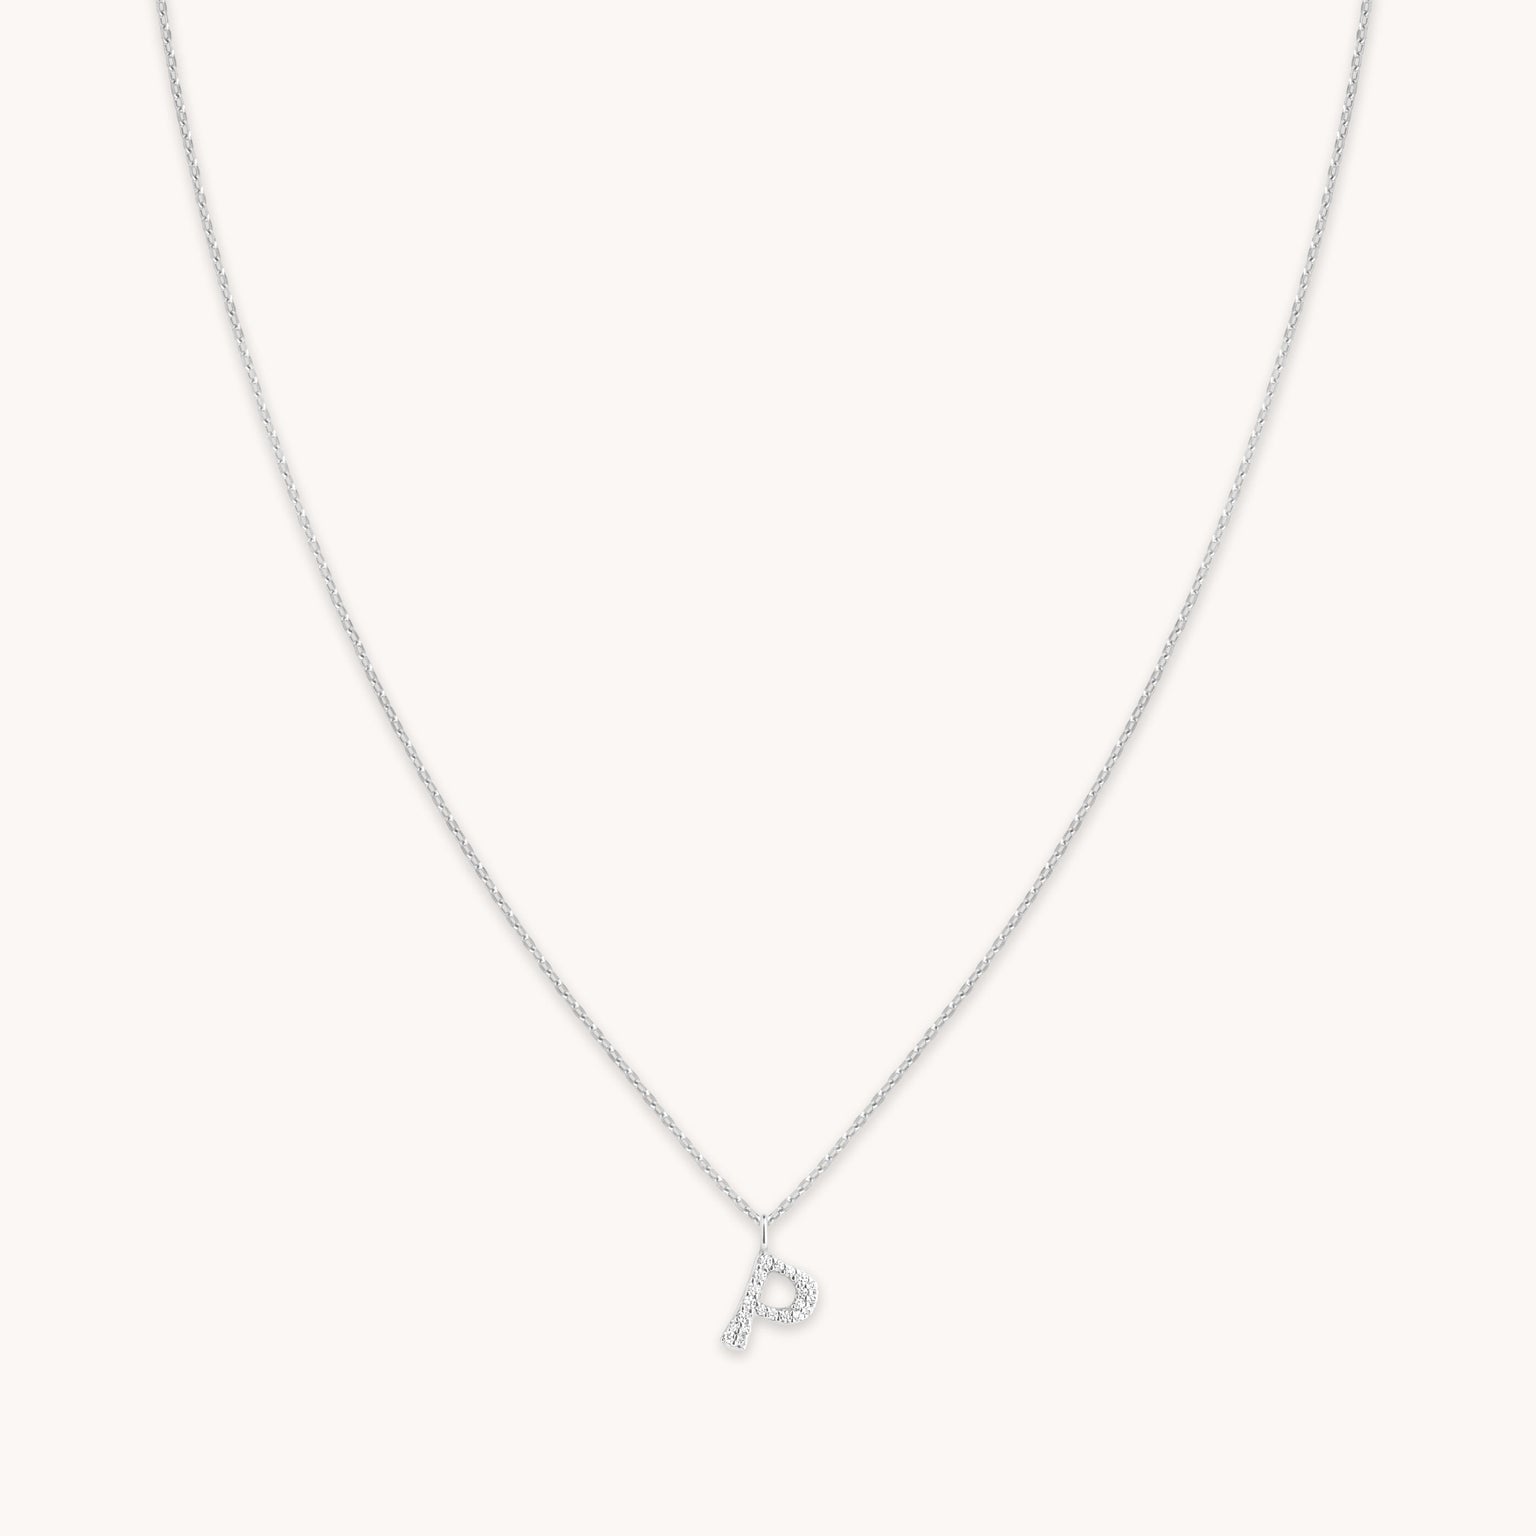 P Initial Pavé Pendant Necklace in Silver